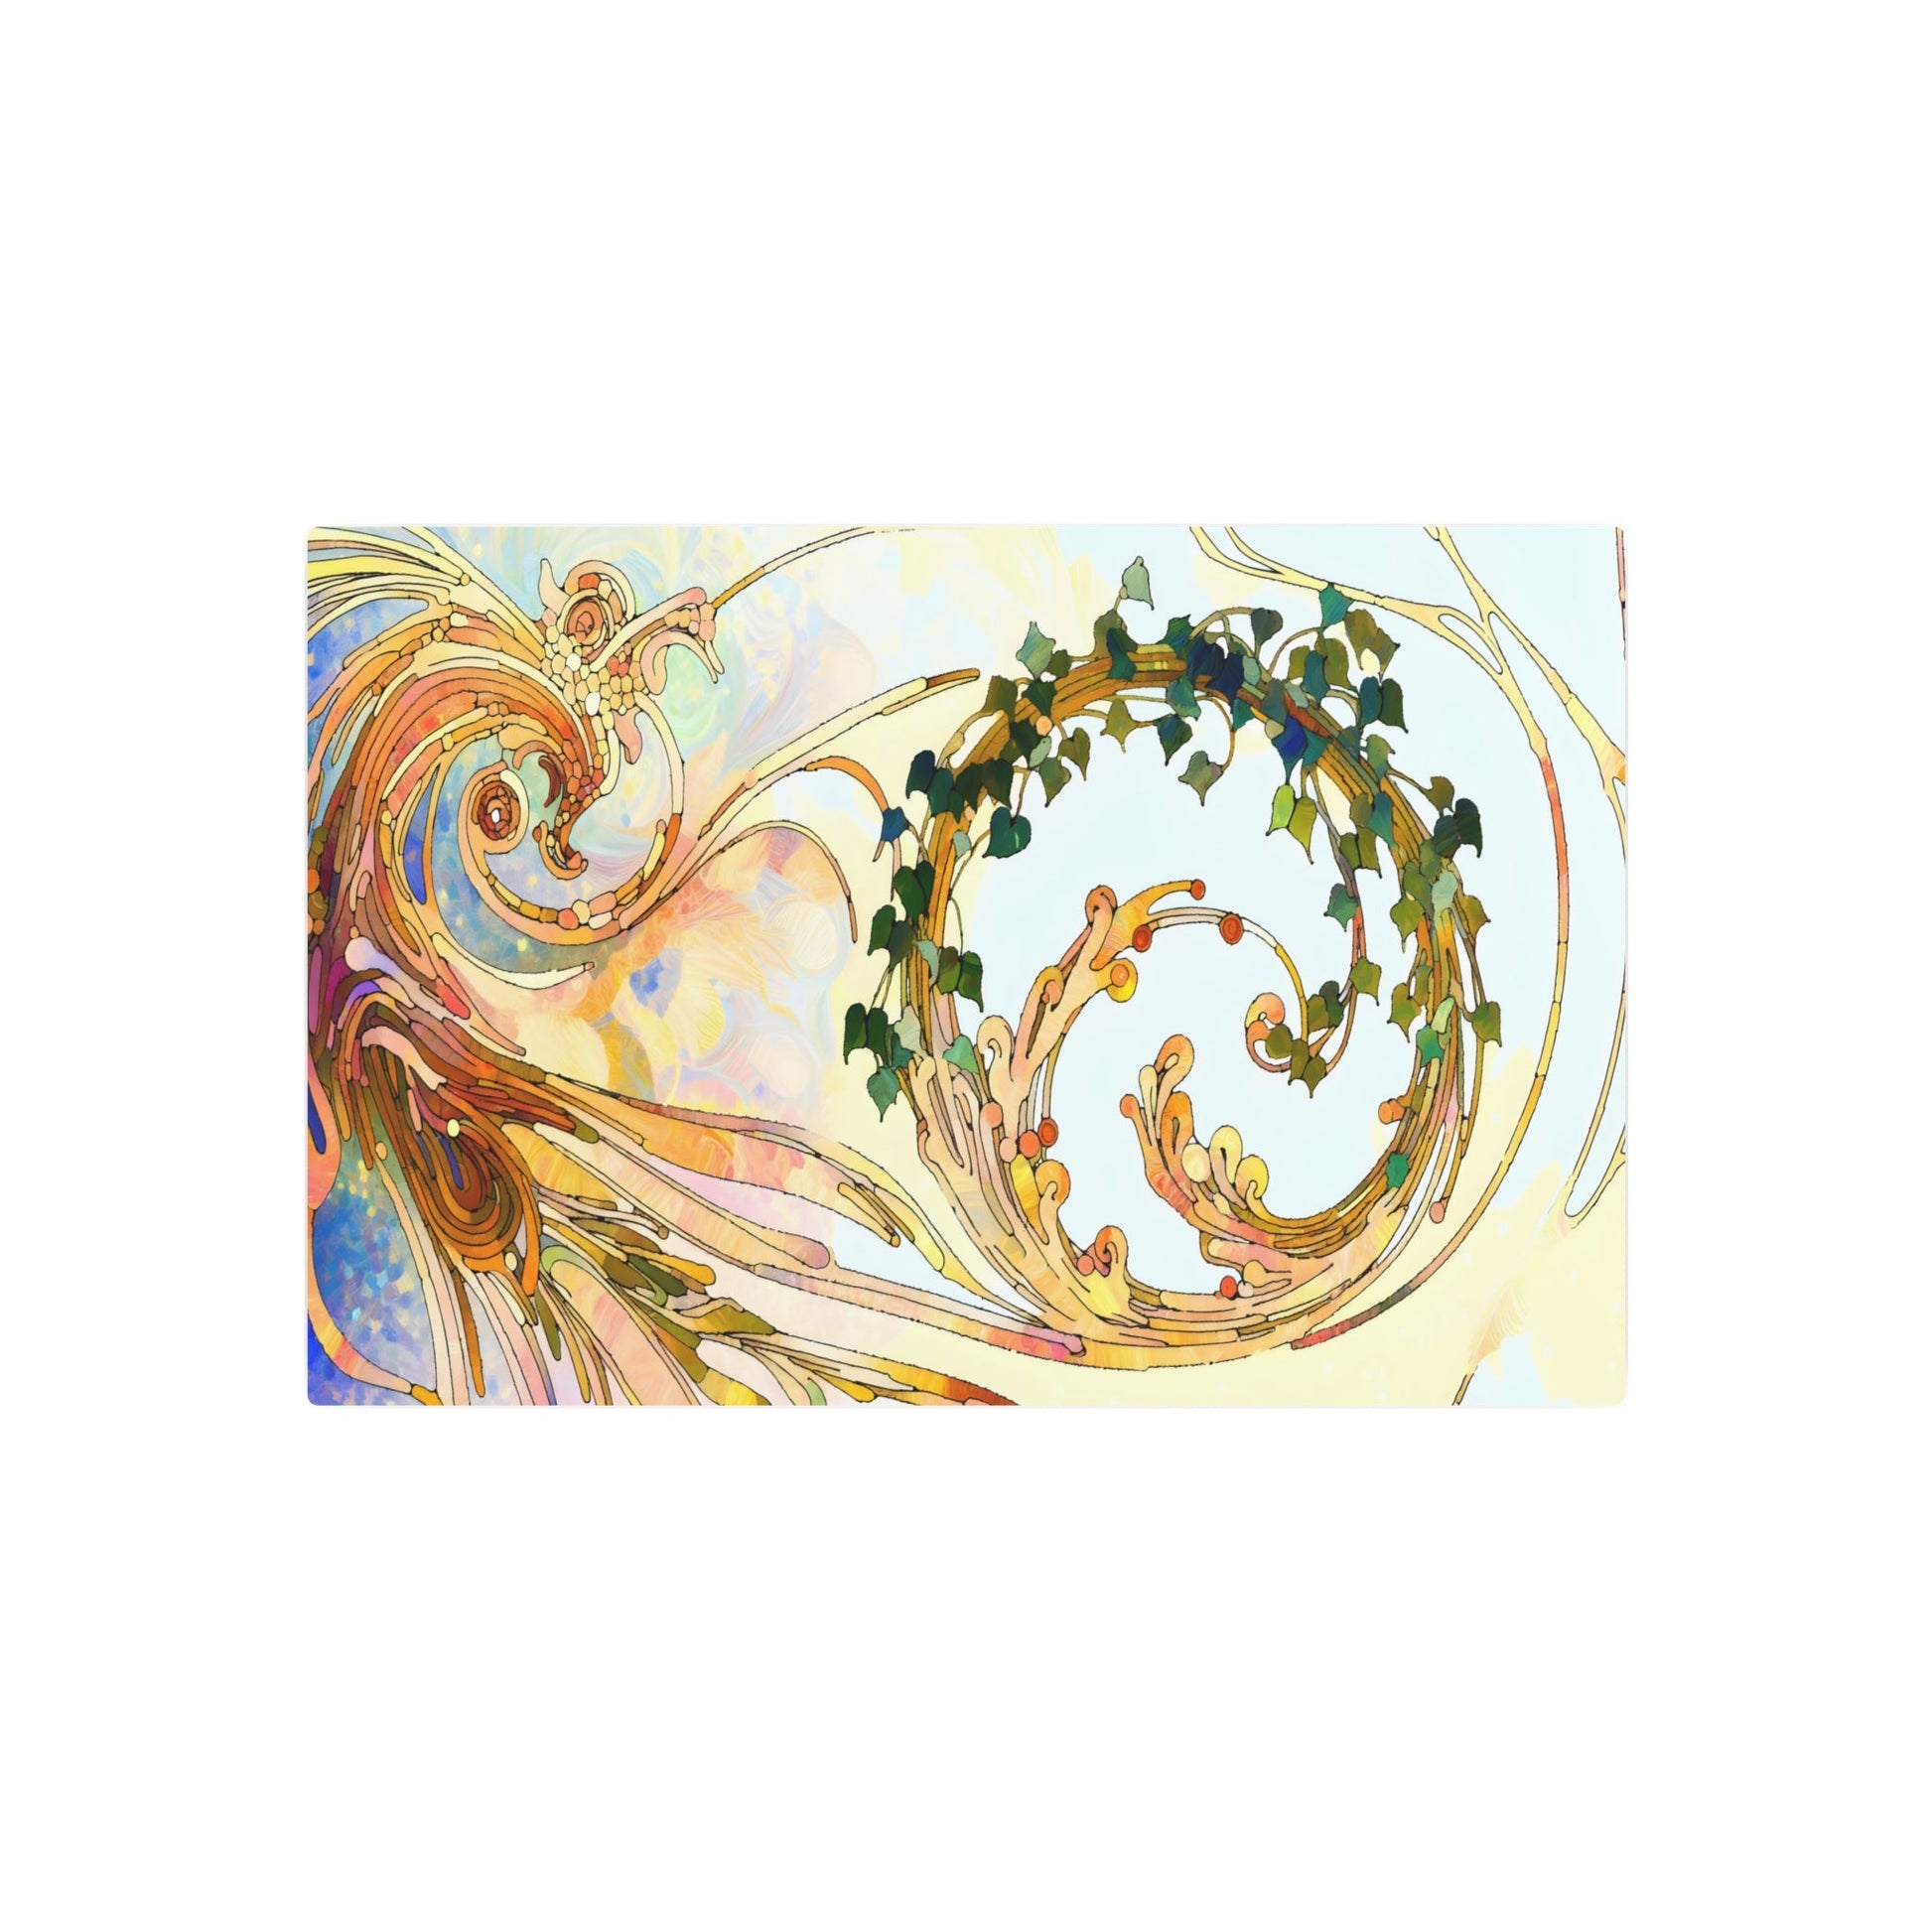 Metal Poster Art | "Art Nouveau Inspired Western Art Style Image with Intricate Flowing Designs and Nature-Inspired Motifs" - Metal Poster Art 30″ x 20″ (Horizontal) 0.12''